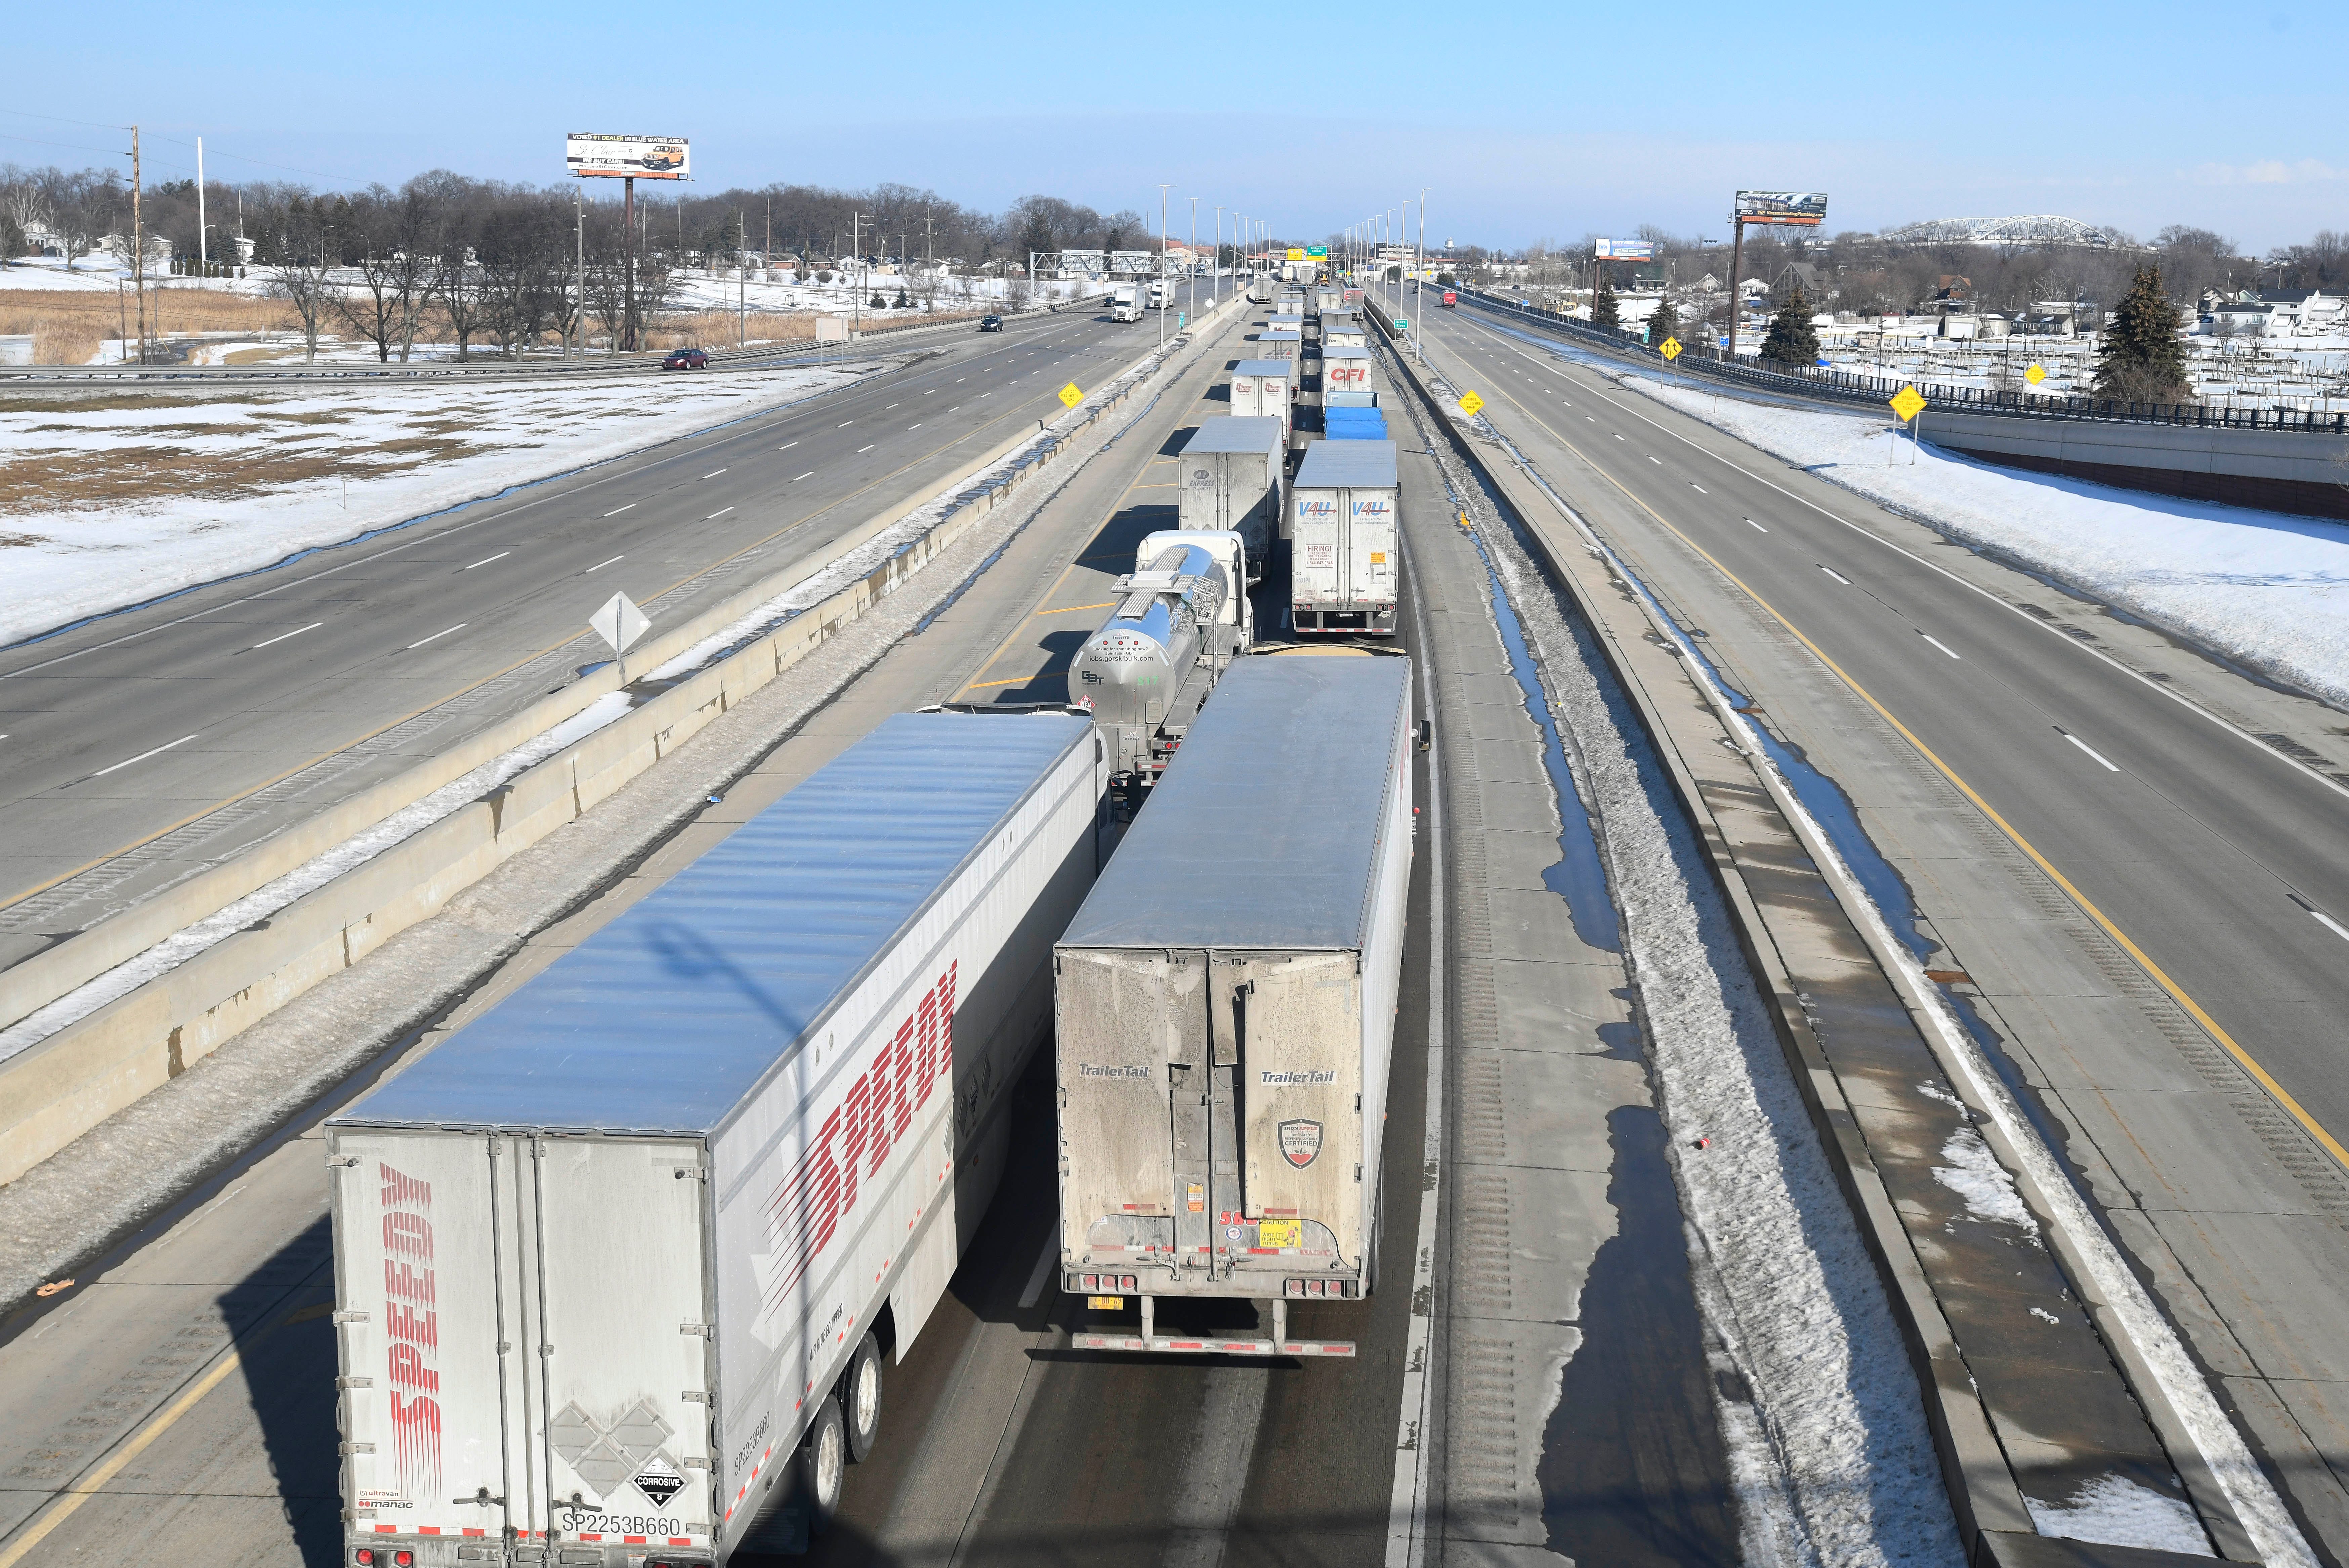 Trucks lined up along I-69 for the Blue Water Bridge, seen in the upper right, in Port Huron, Michigan on February 9, 2022.